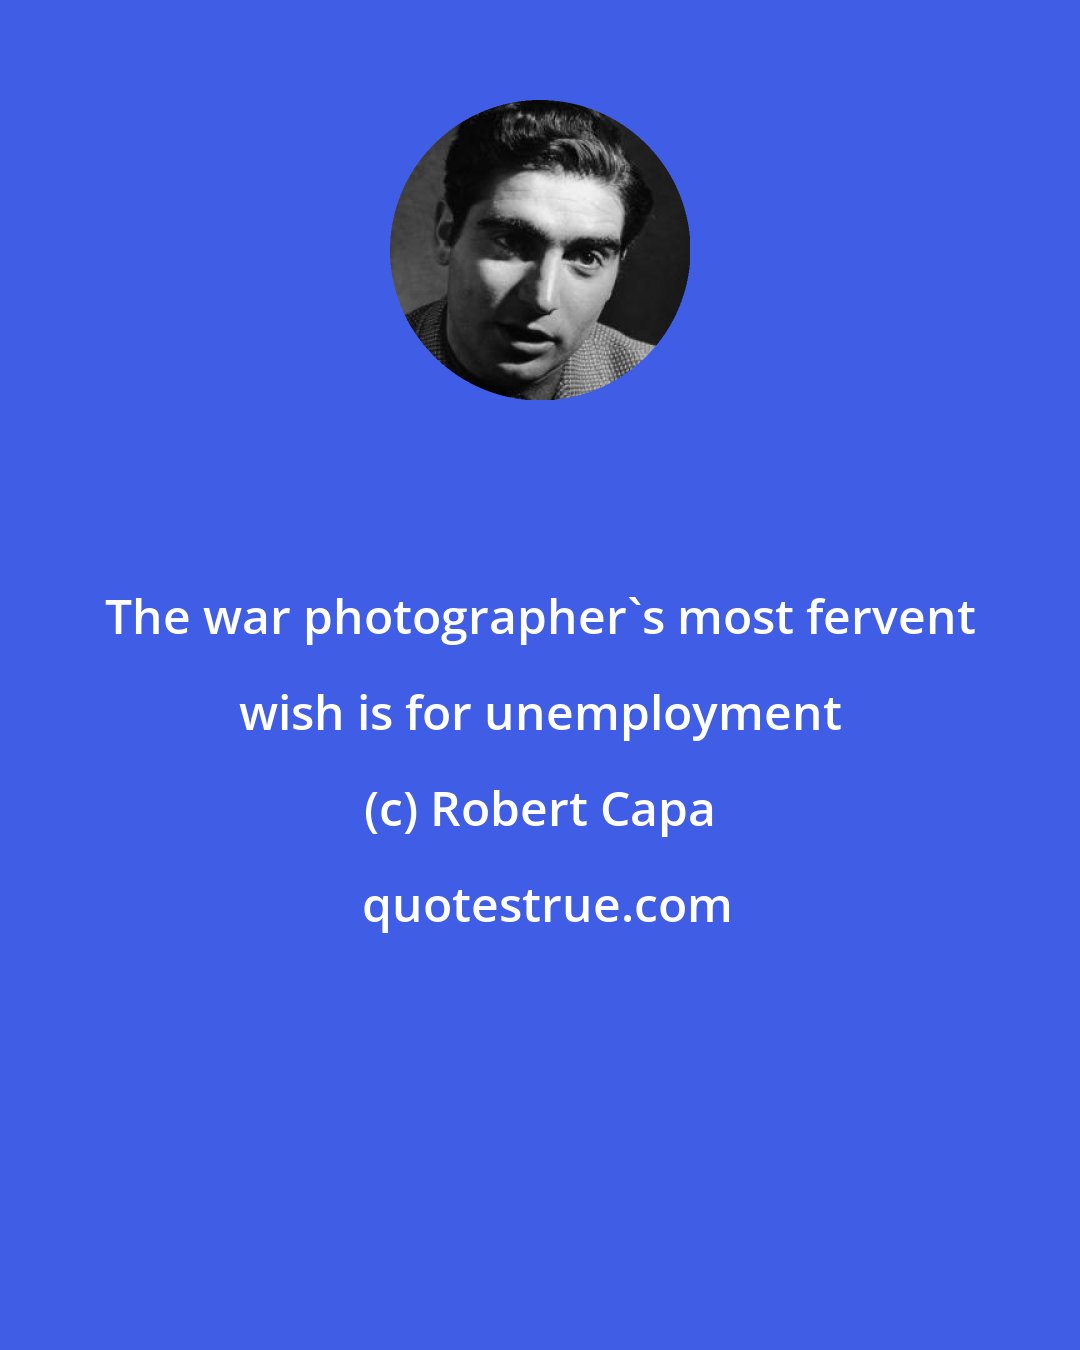 Robert Capa: The war photographer's most fervent wish is for unemployment